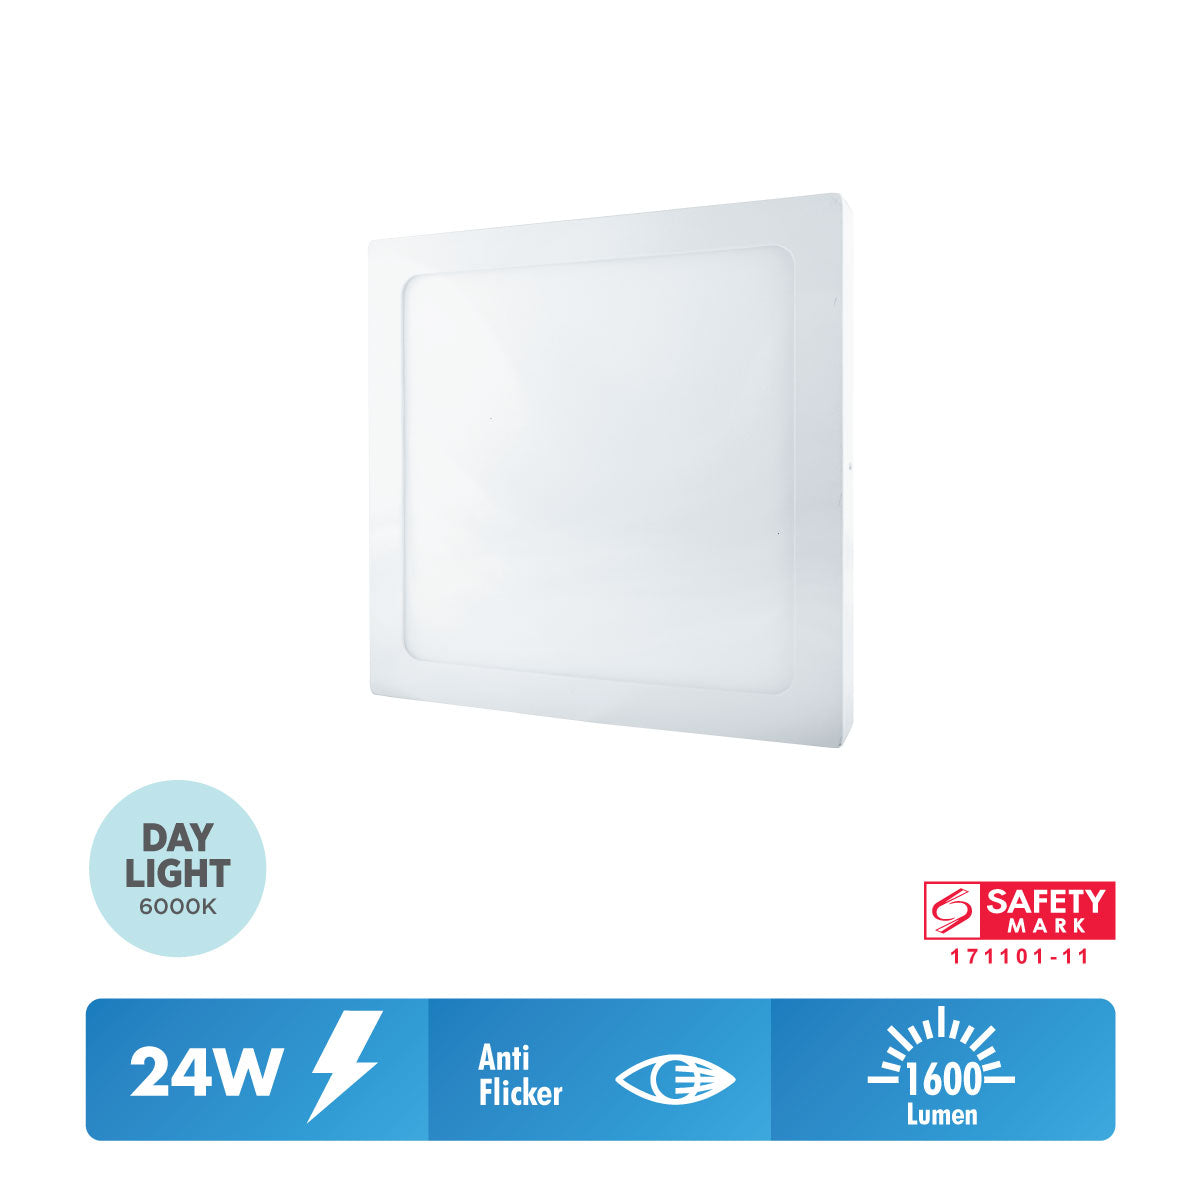 Daiyo LPS 153-DL 24W LED Surfaced Panel Light Square Shape (Day Light)